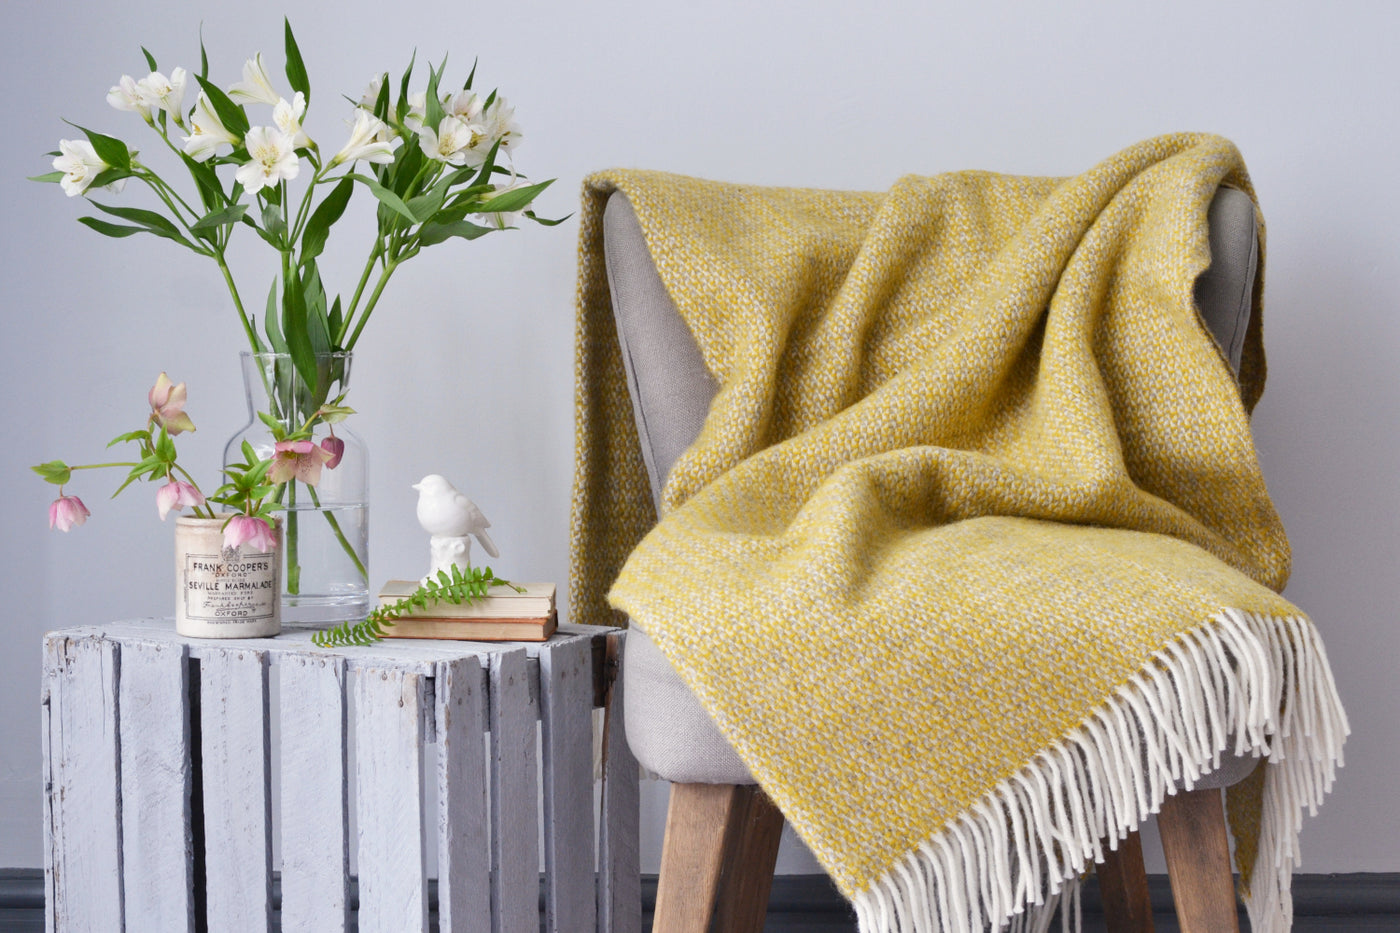 A large yellow and grey windmill wool blanket draped over a lounge chair on the right. Flower cases placed on a wooden crate on the left